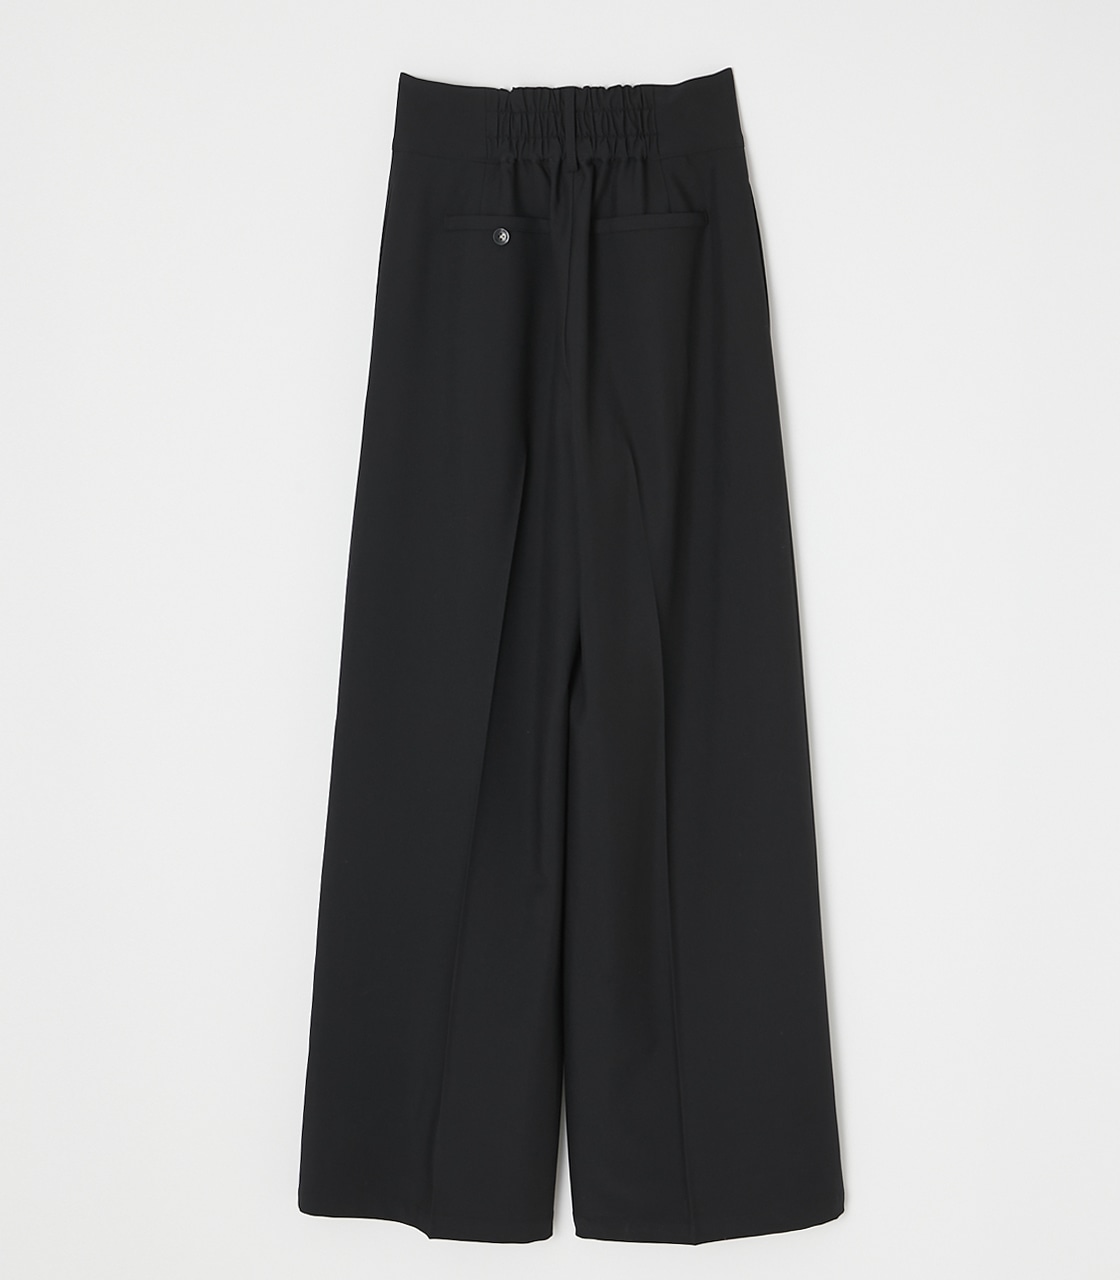 【PLUS】TUCK WIDE TROUSERS PANTS/タックワイドトラウザーパンツ